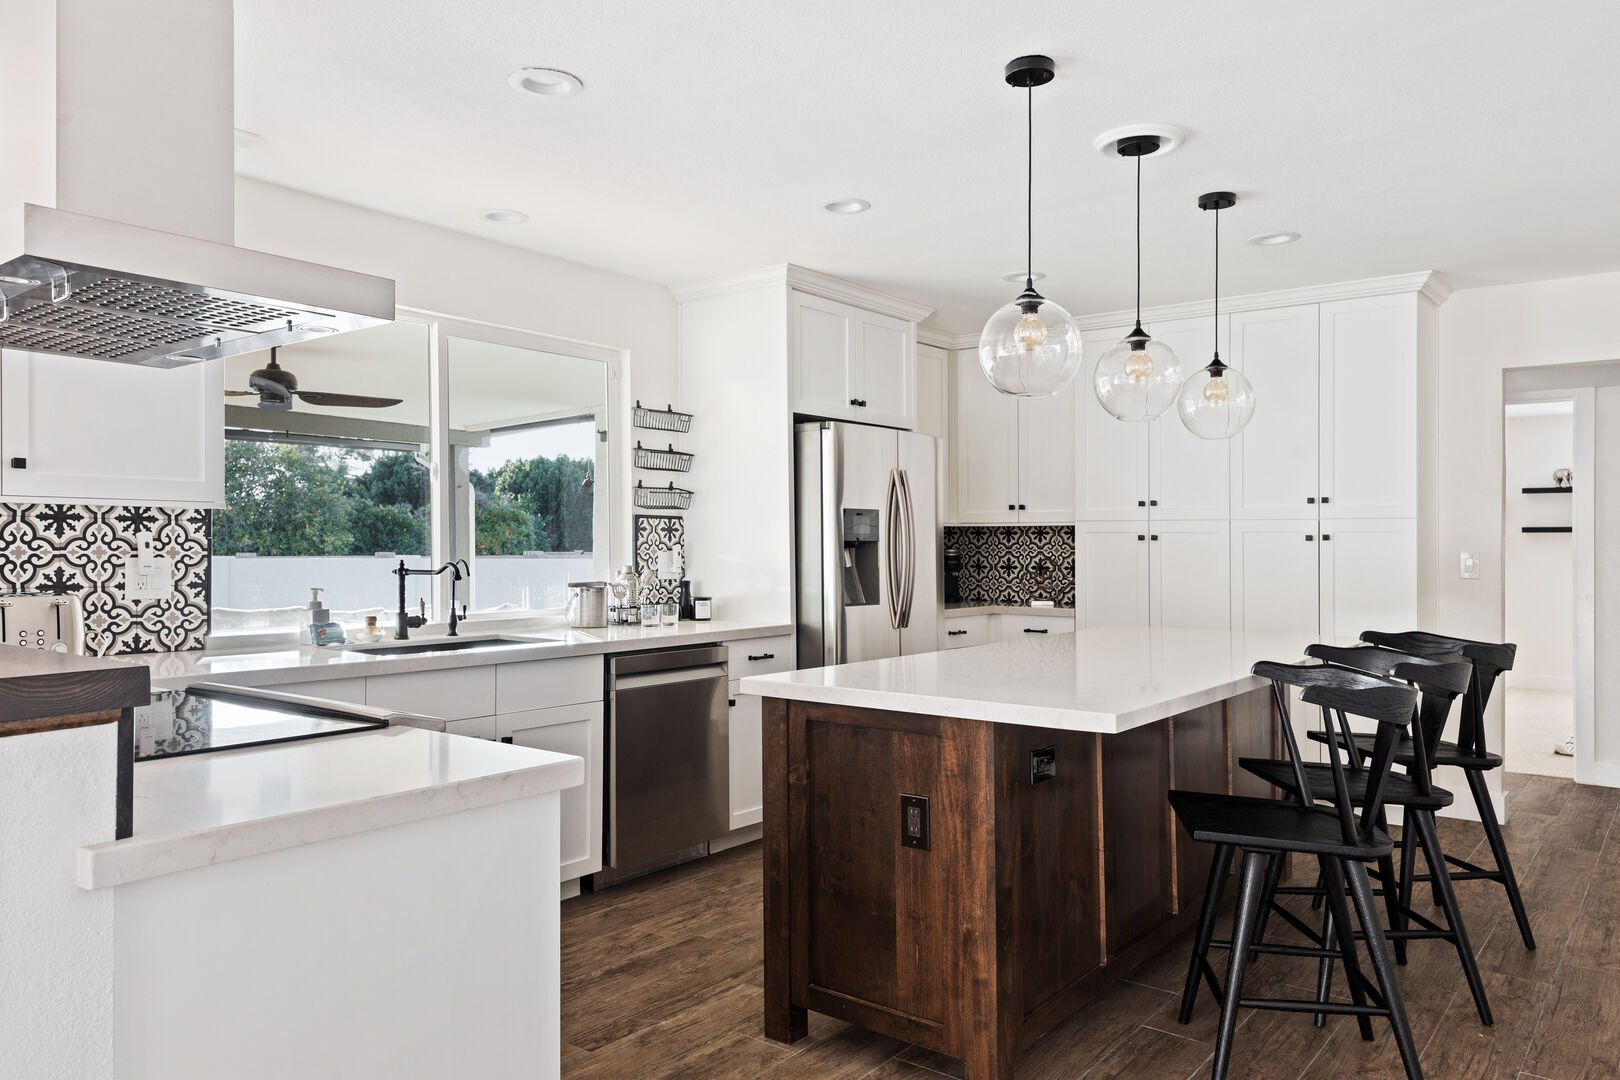 Stainless steel appliances and seating at the kitchen island for three.